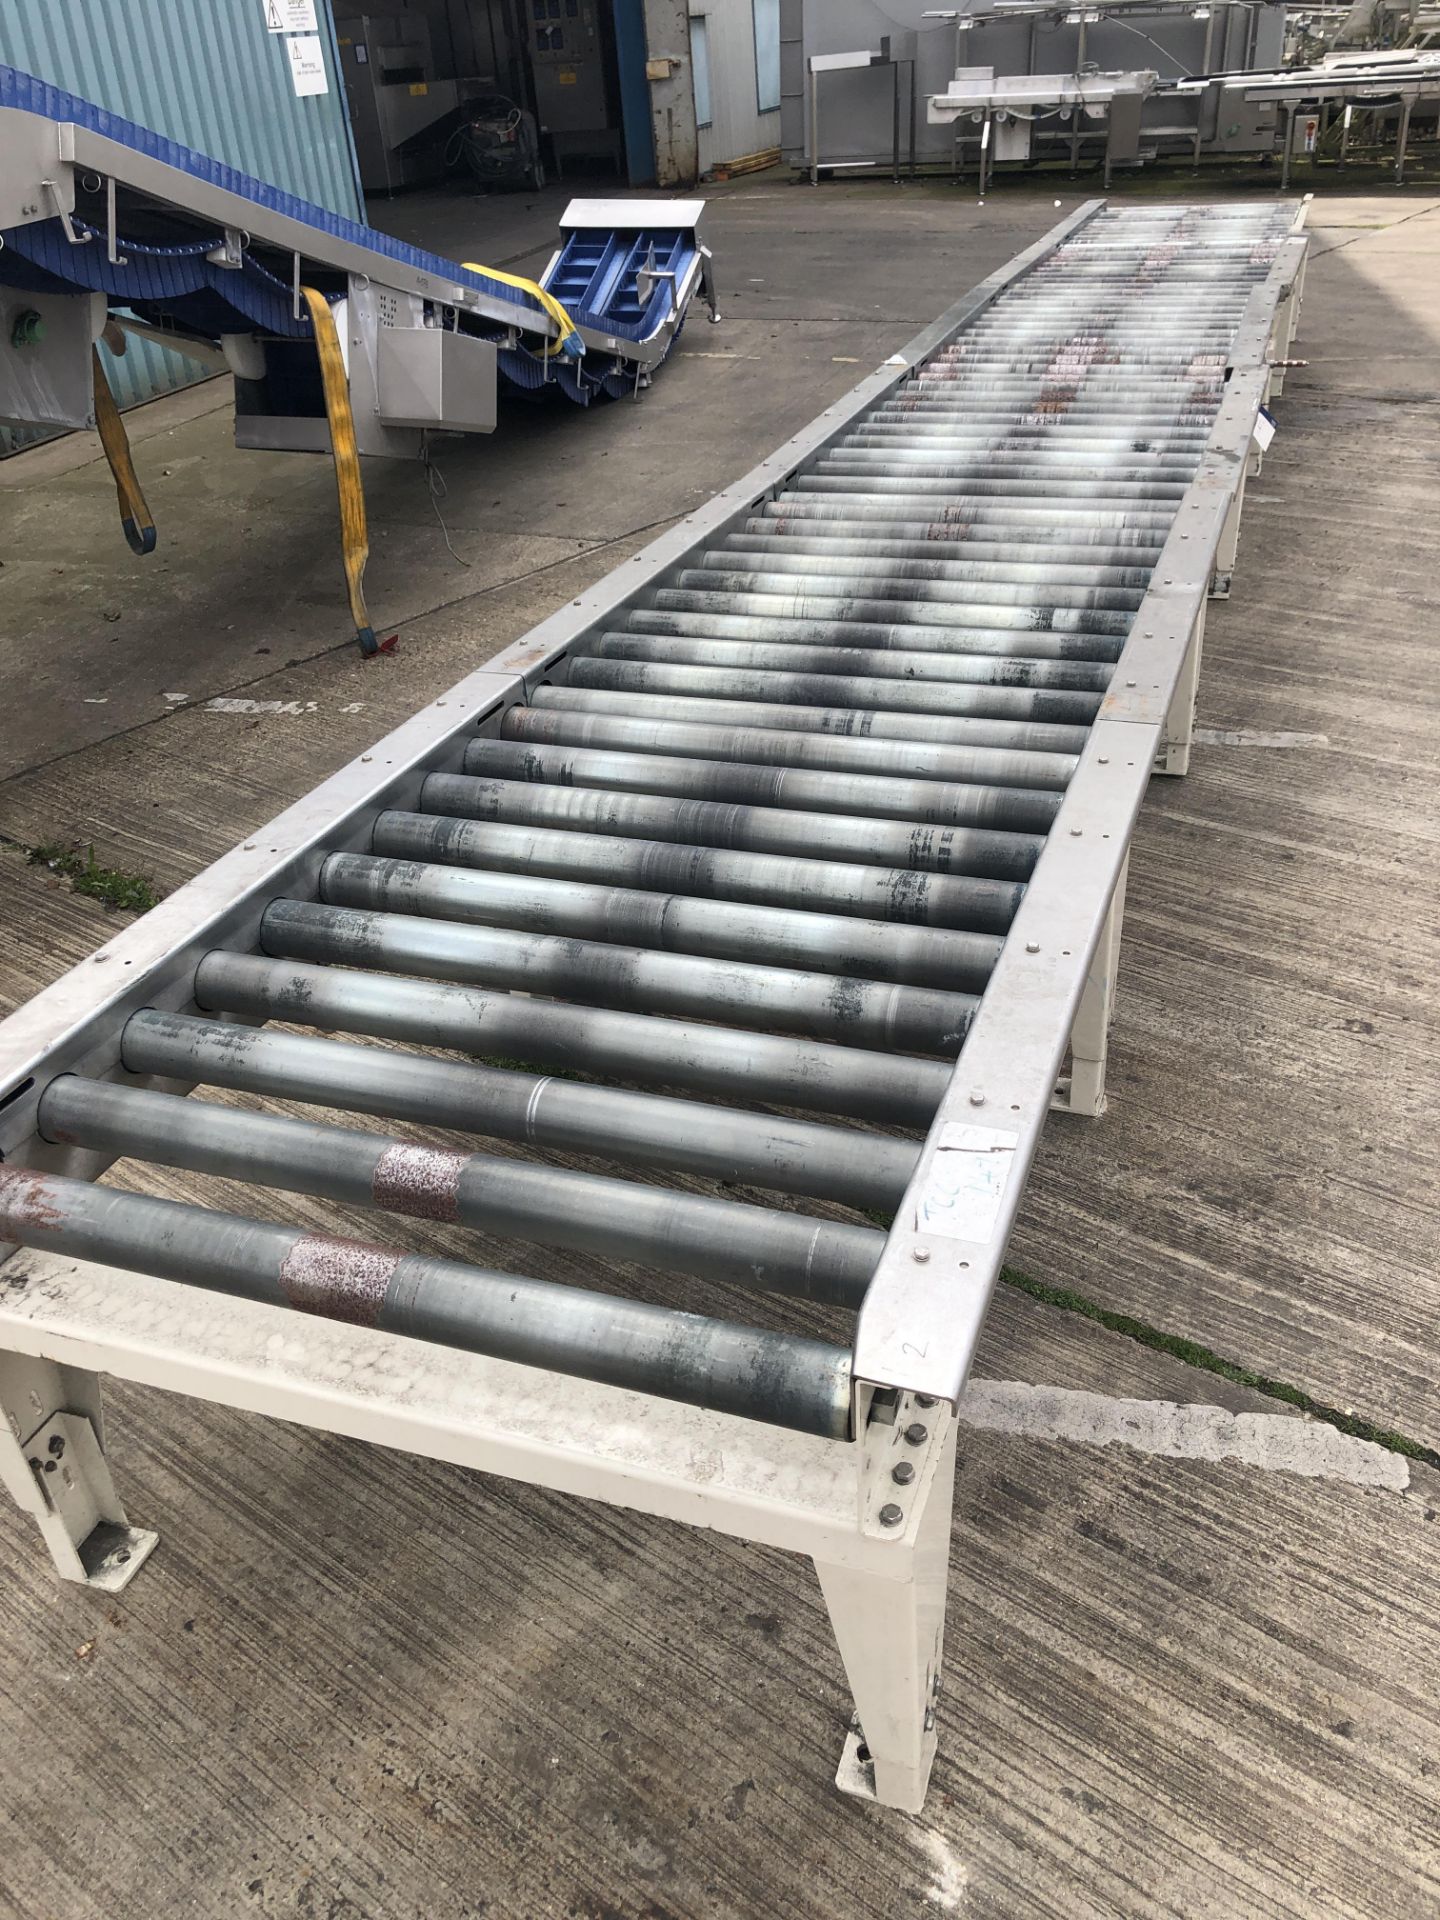 Six Section Pallet Conveyor System